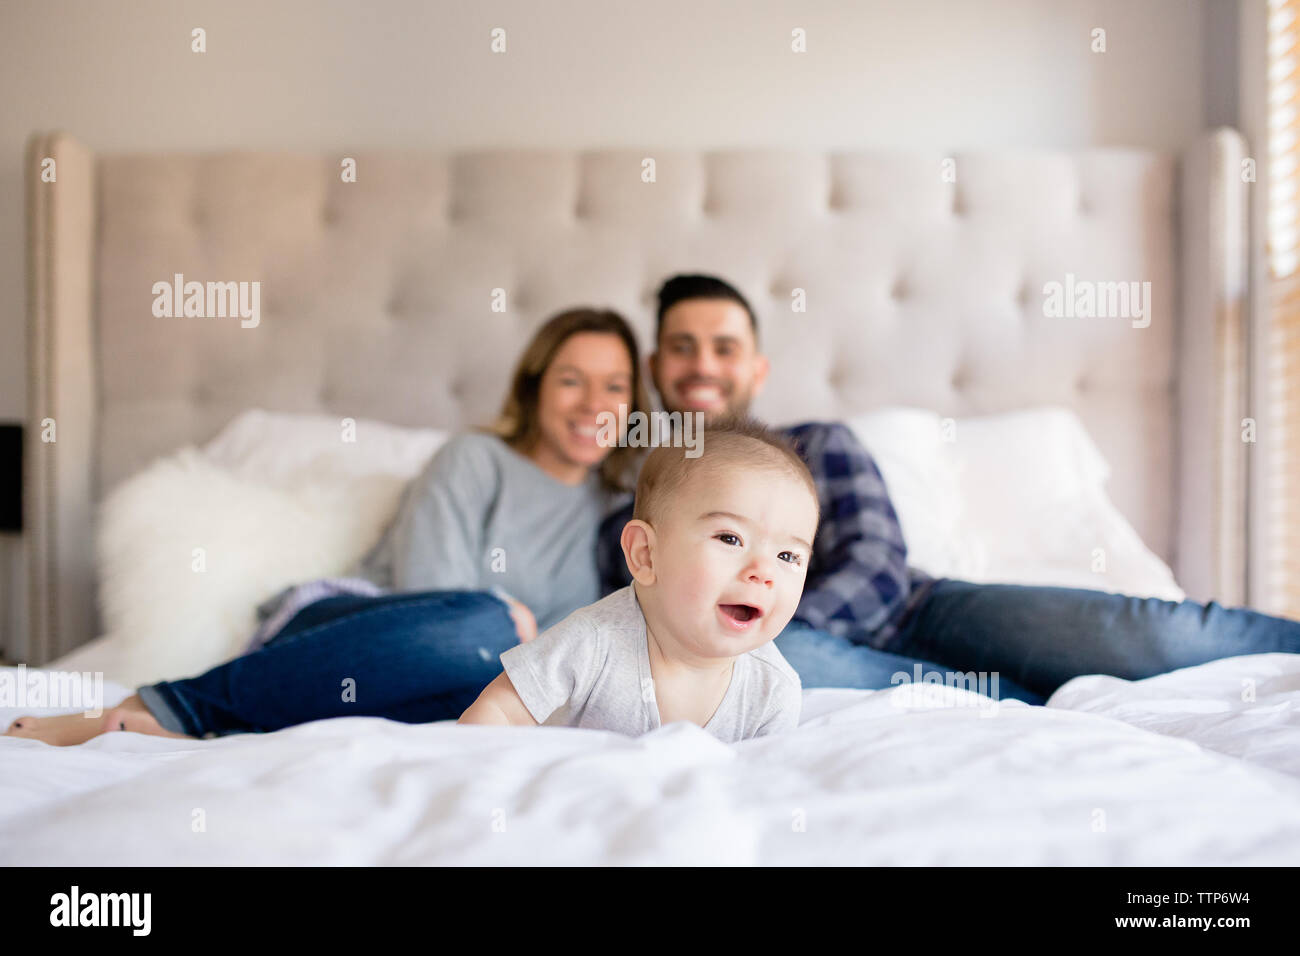 Baby boy laying on bed smiling with mom and dad in background indoors Stock Photo